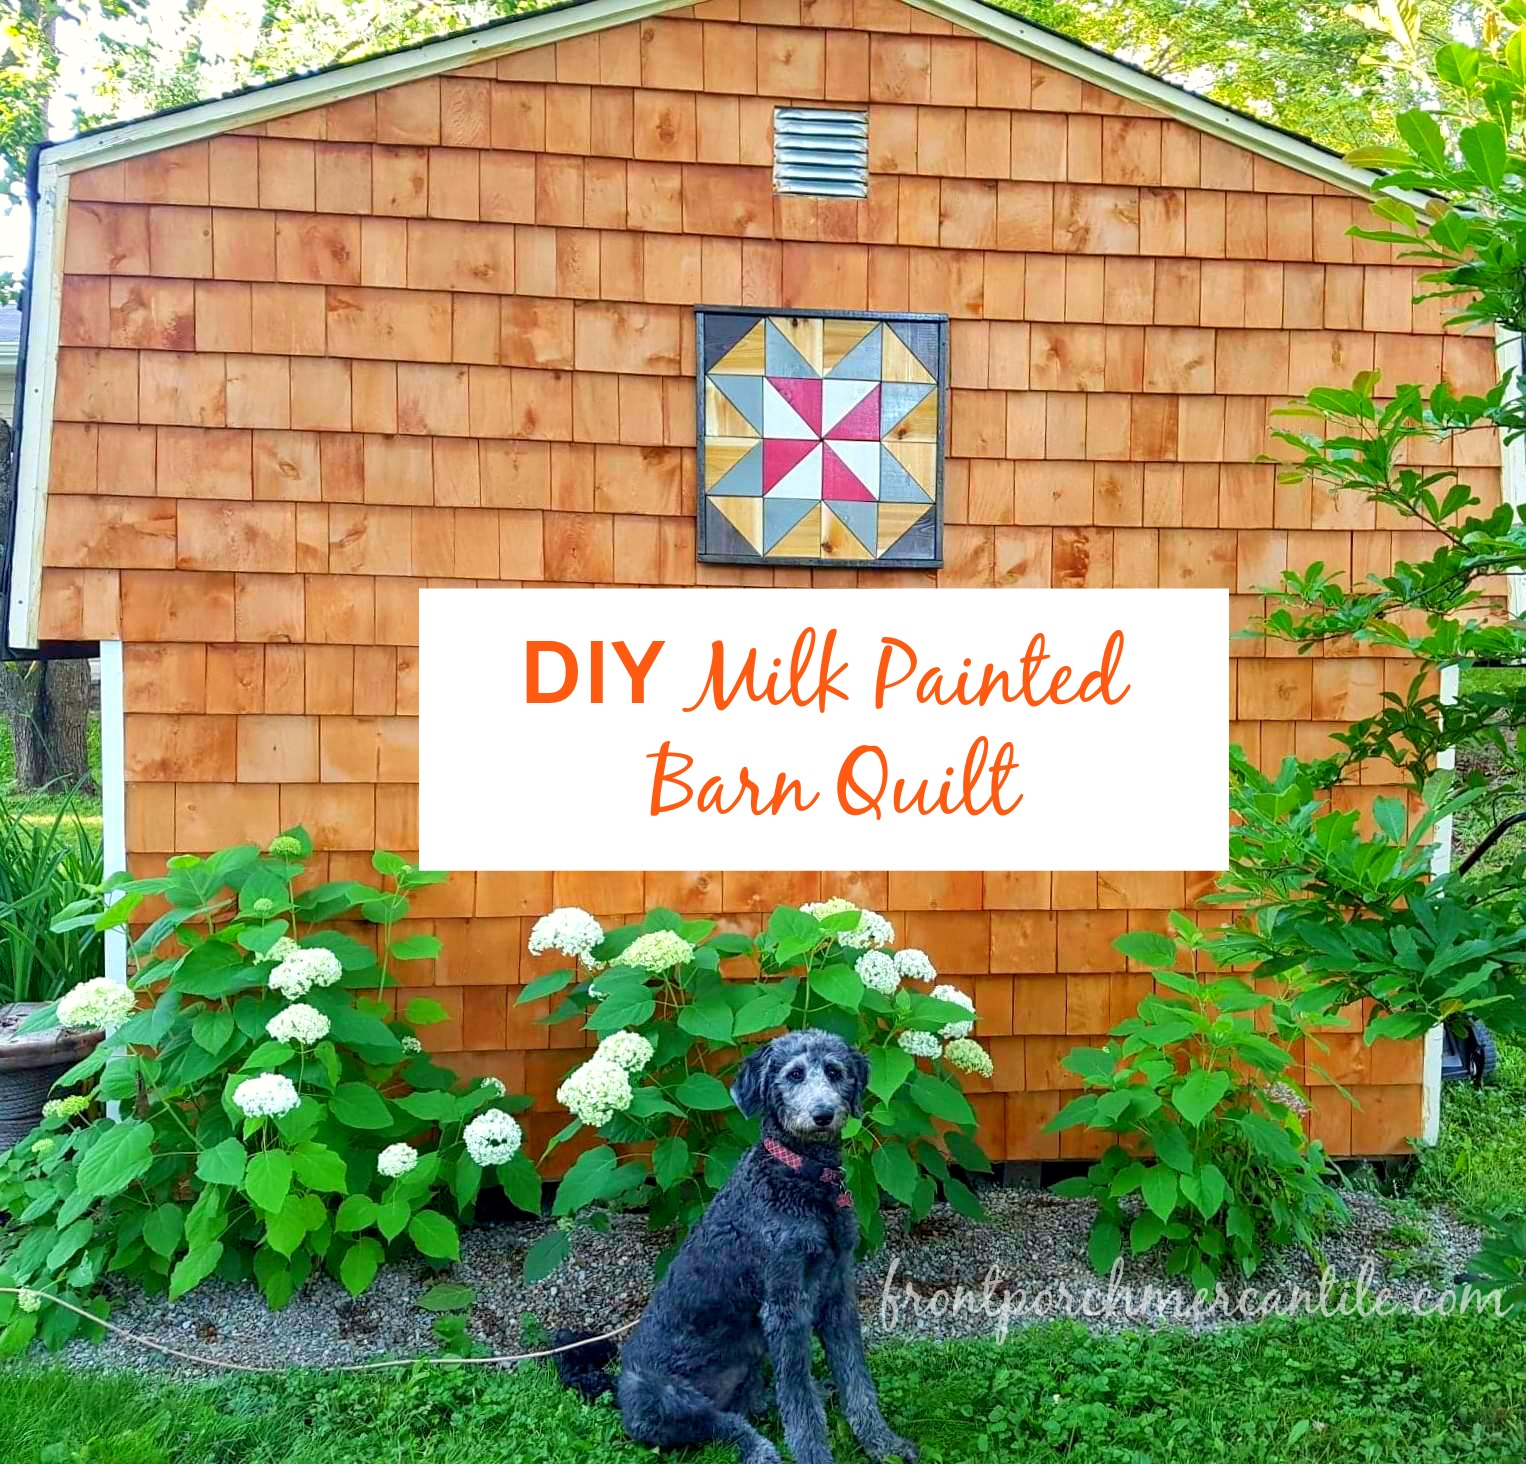 A beautiful milk painted barn quilt from Front Porch Mercantile customer